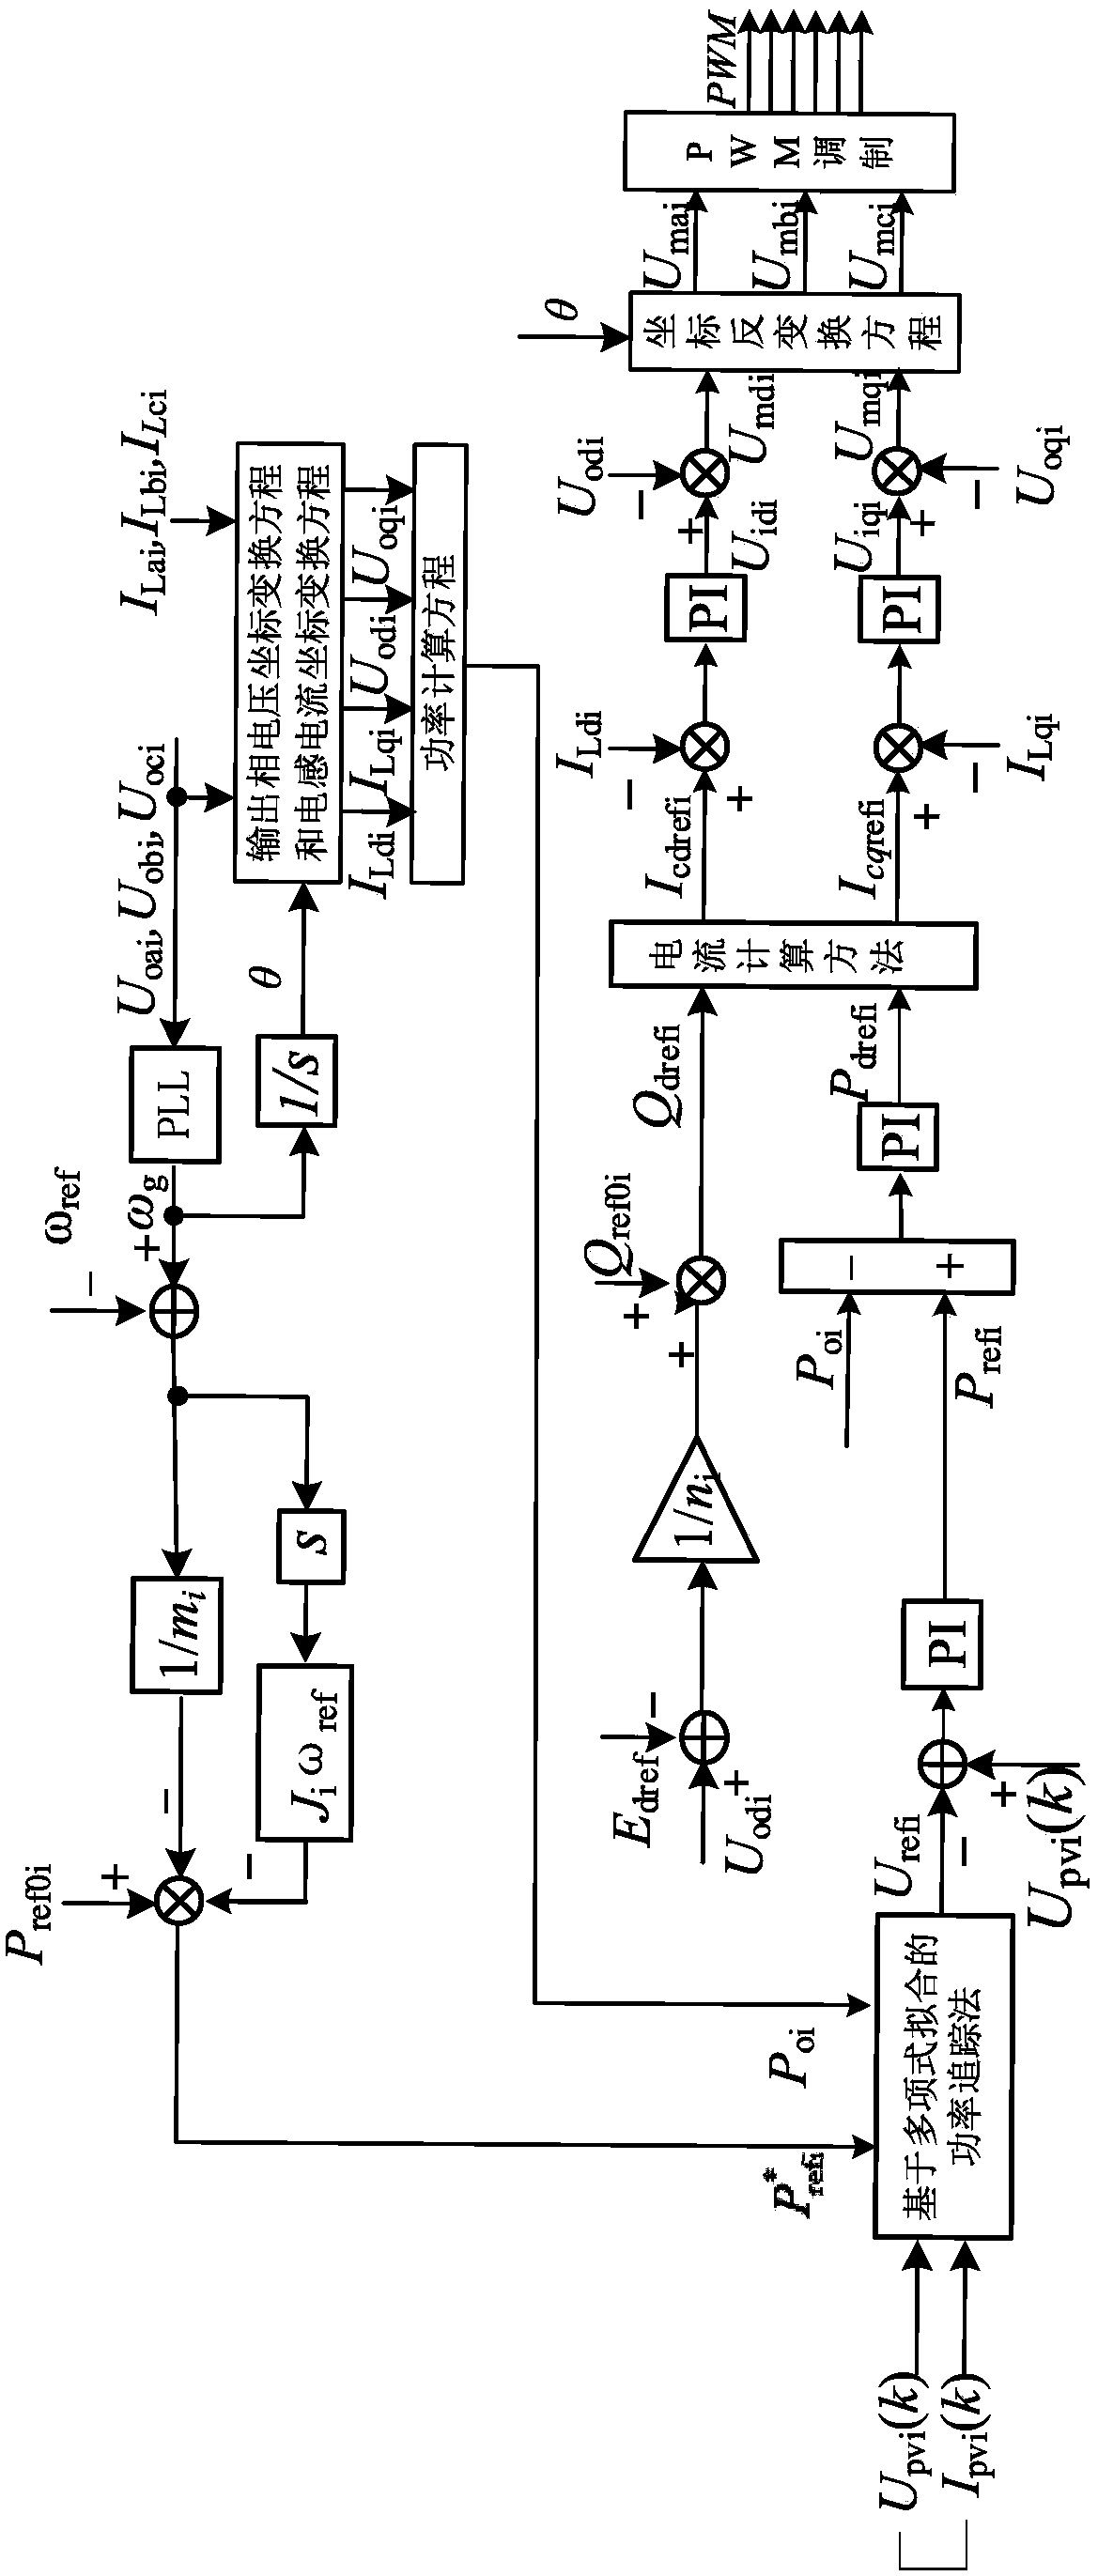 Photovoltaic virtual synchronous control method based on power tracing